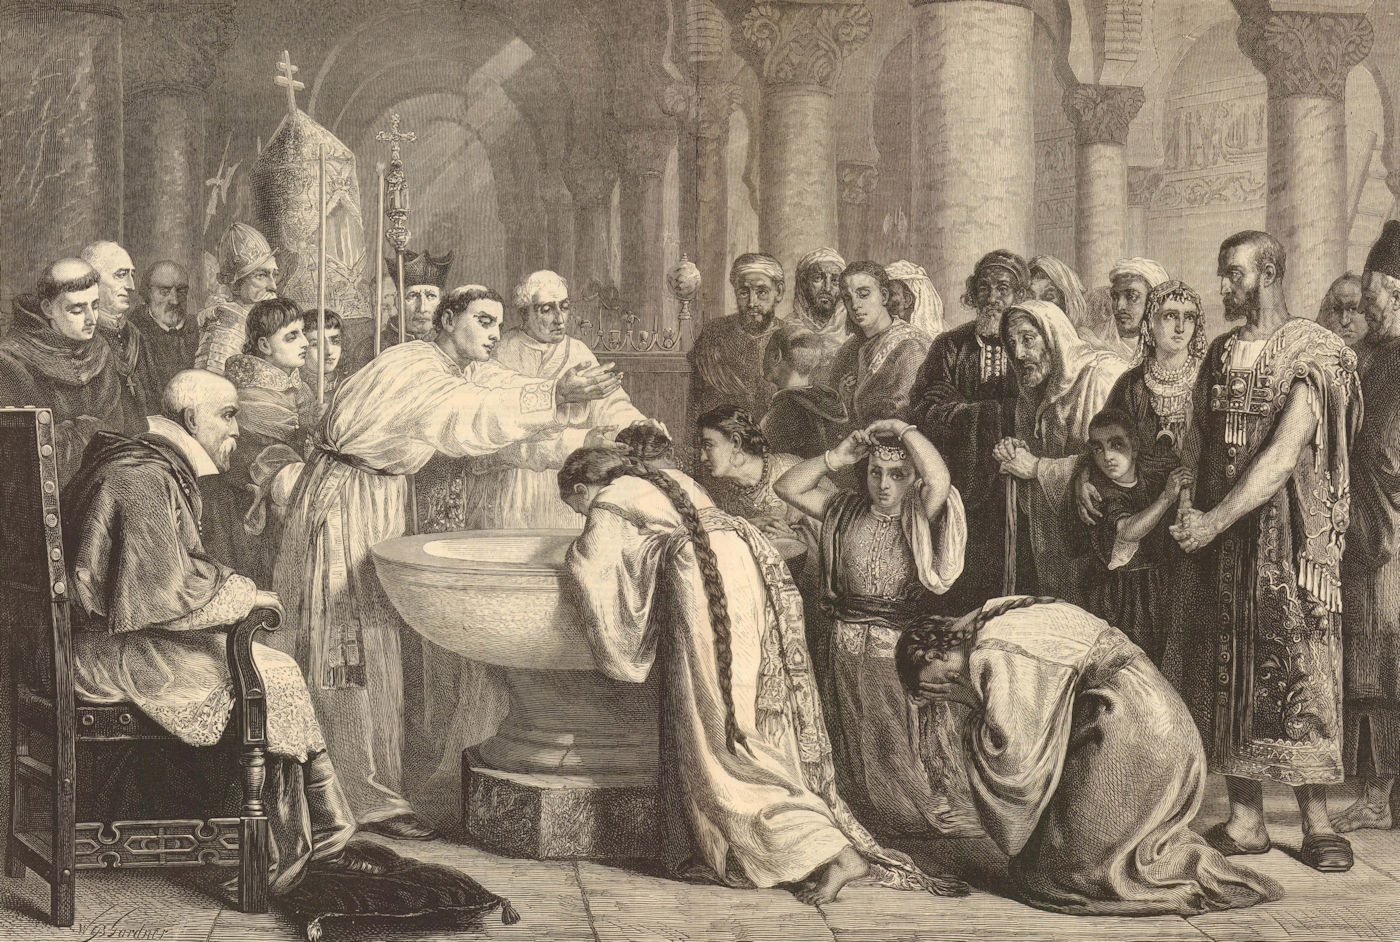 Compulsory baptism of the Moors after the conquest of Granada. Edwin Long 1873